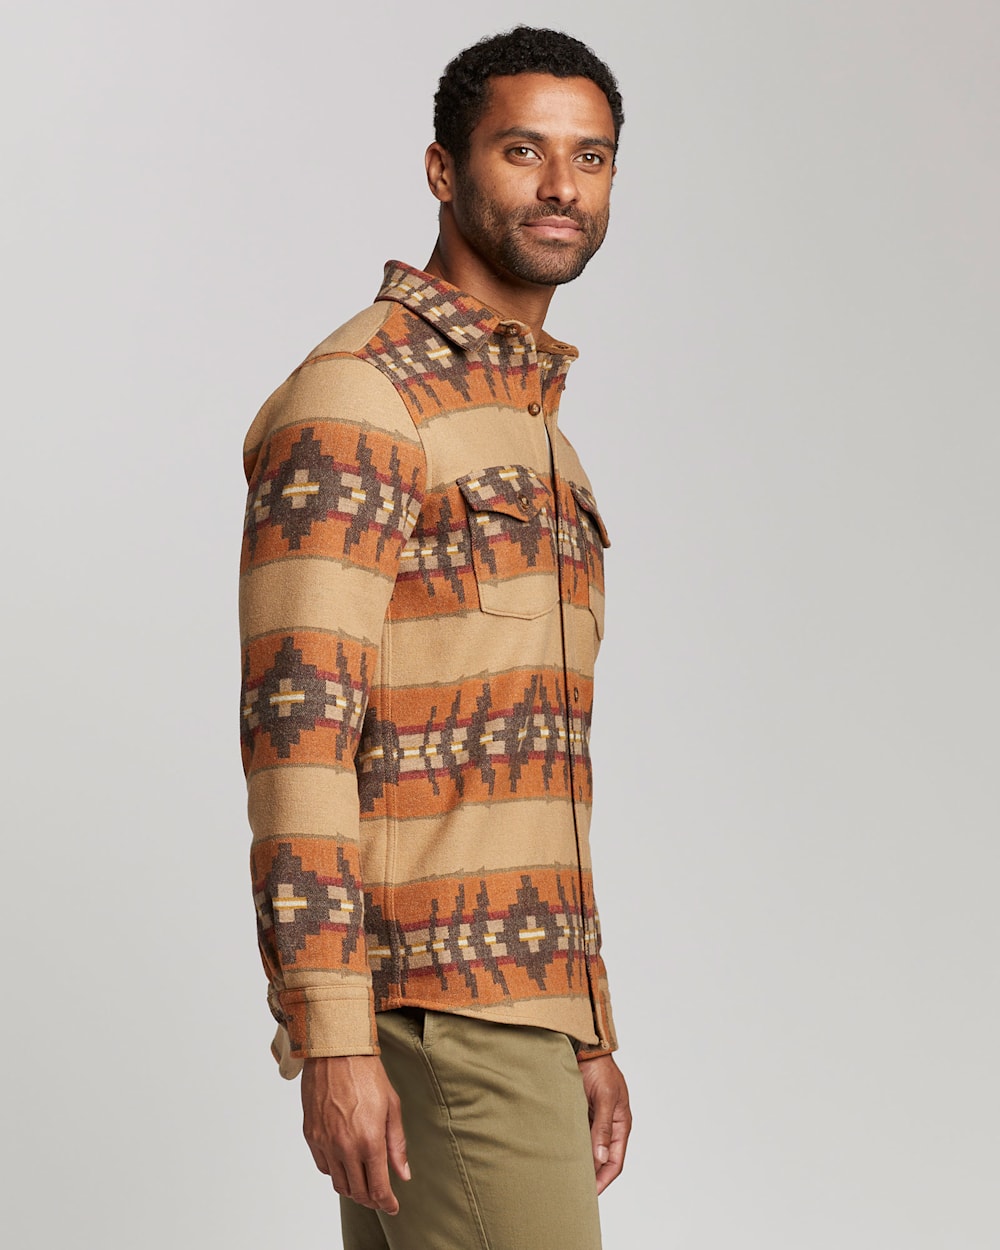 ALTERNATE VIEW OF MEN'S FITTED LA PINE OVERSHIRT IN TAN BANDED STRIPE image number 2